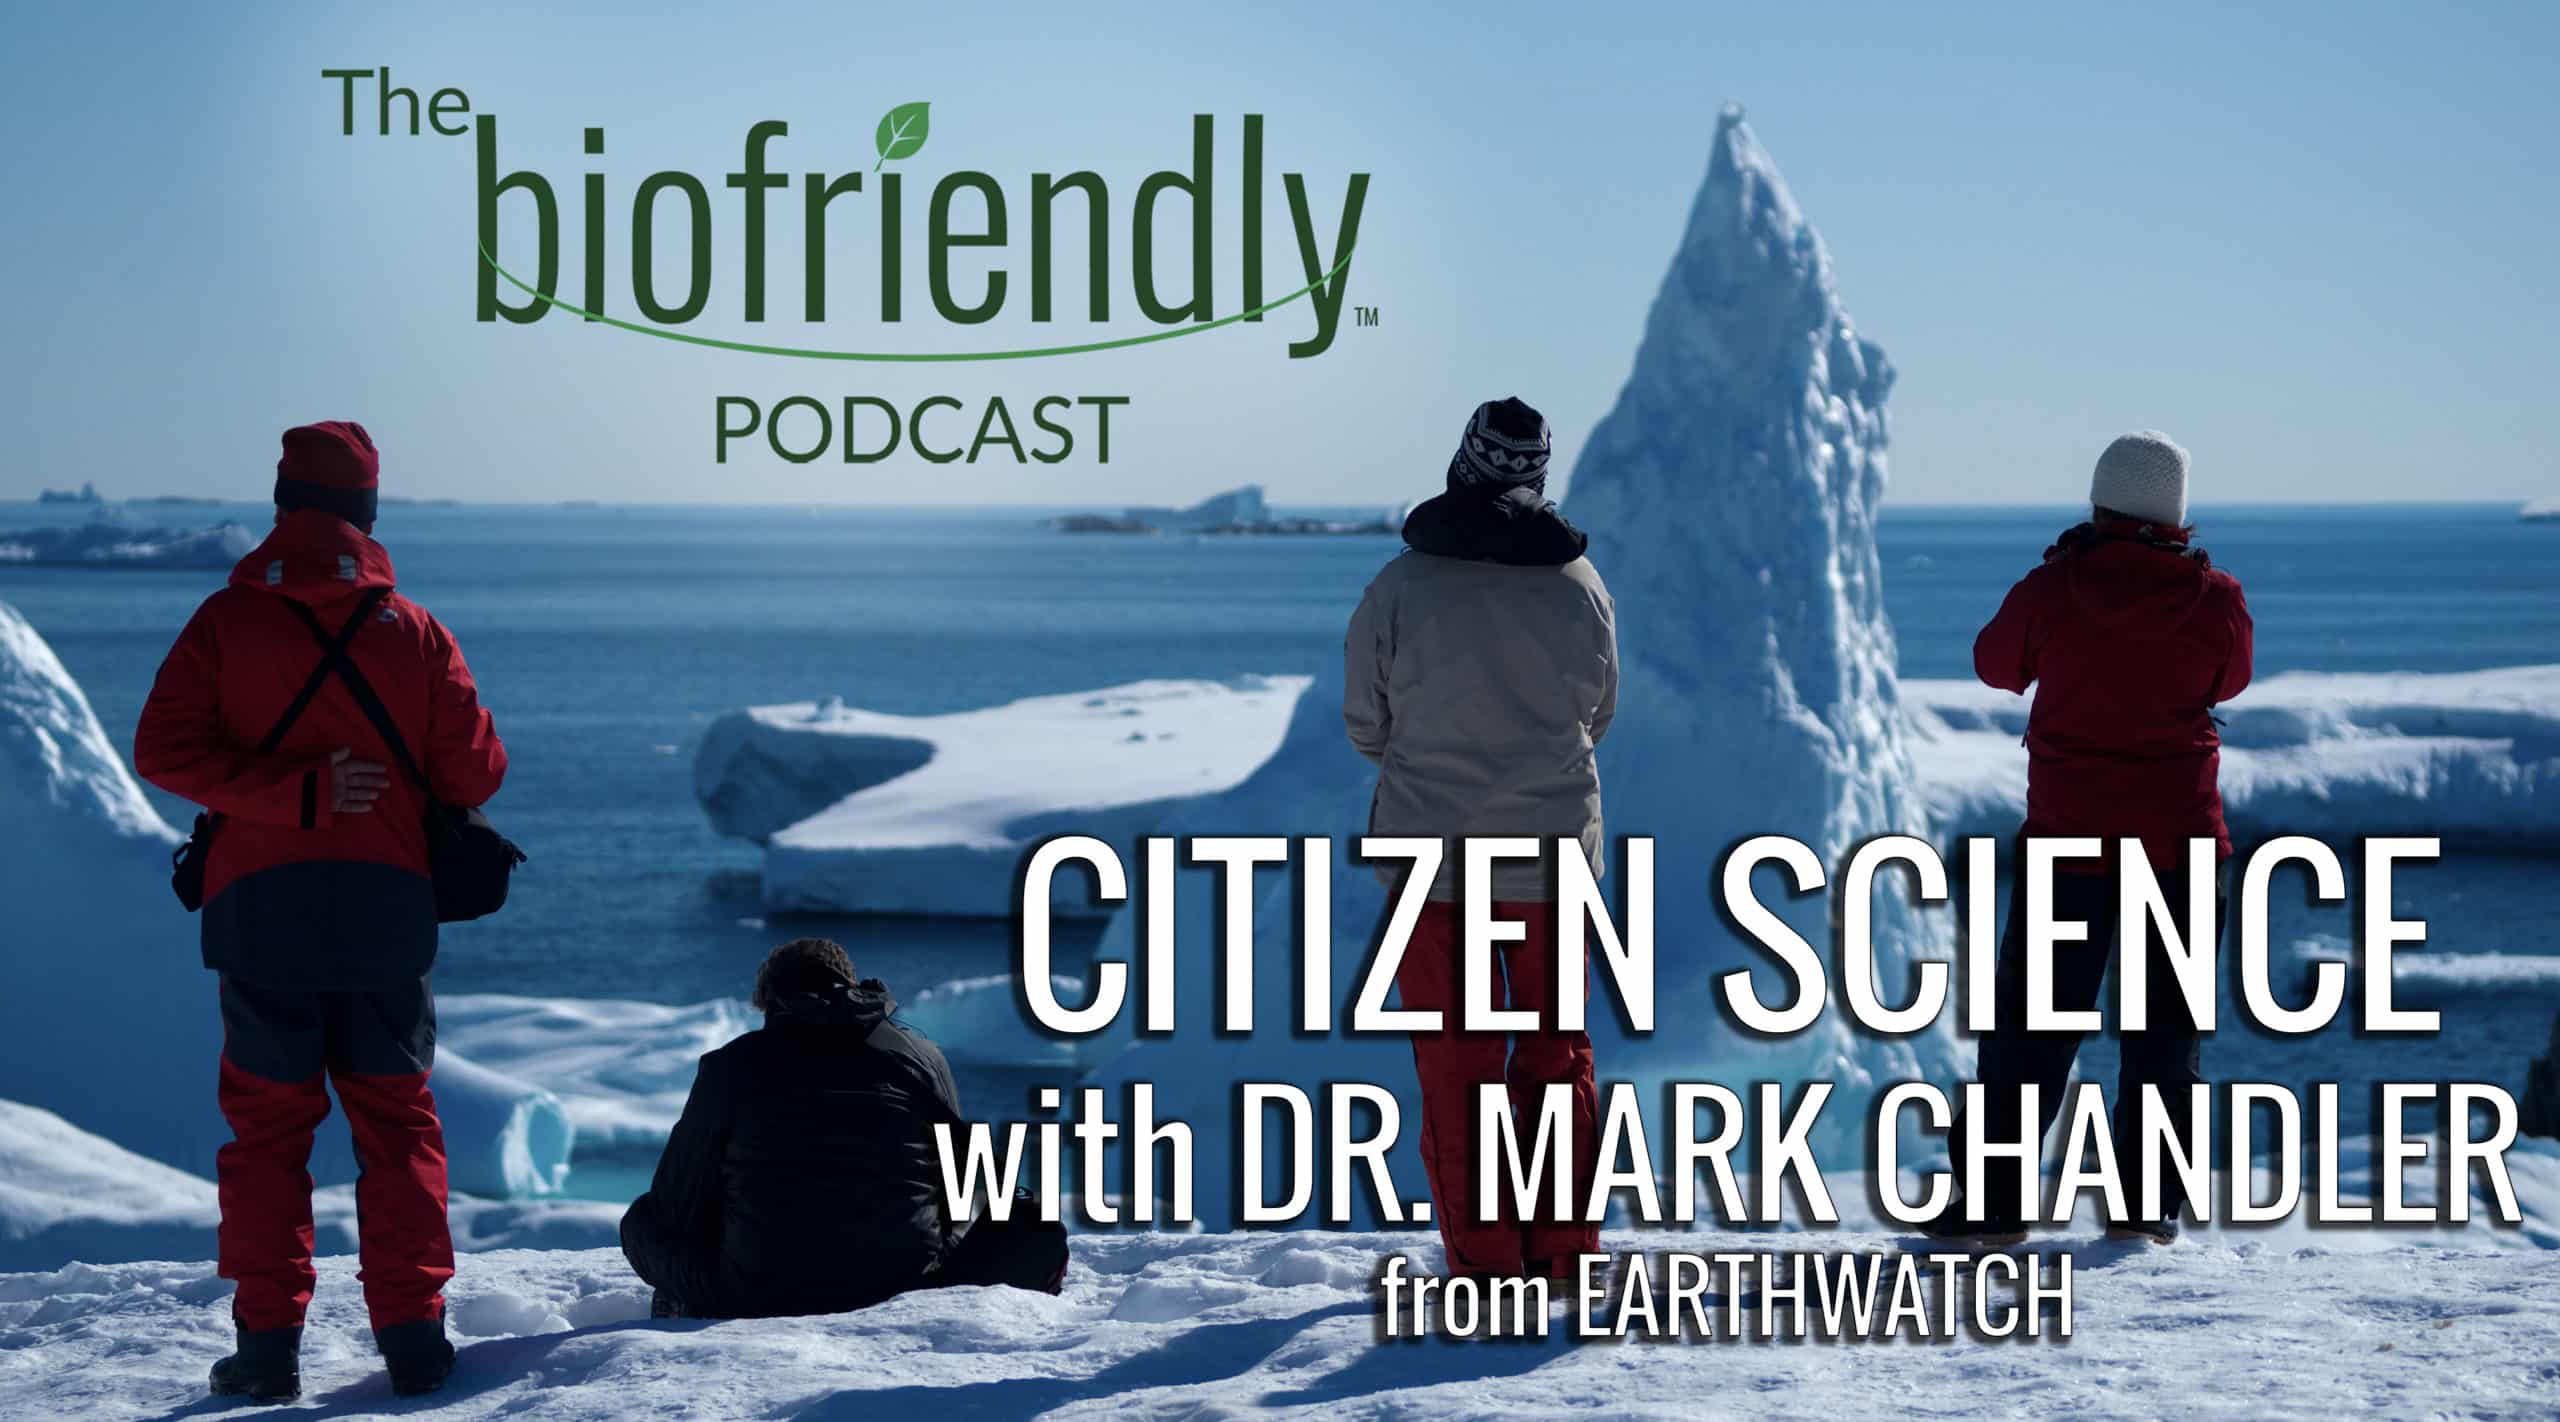 The Biofriendly Podcast - Episode 83 - Citizen Science with Dr. Mark Chandler from Earthwatch